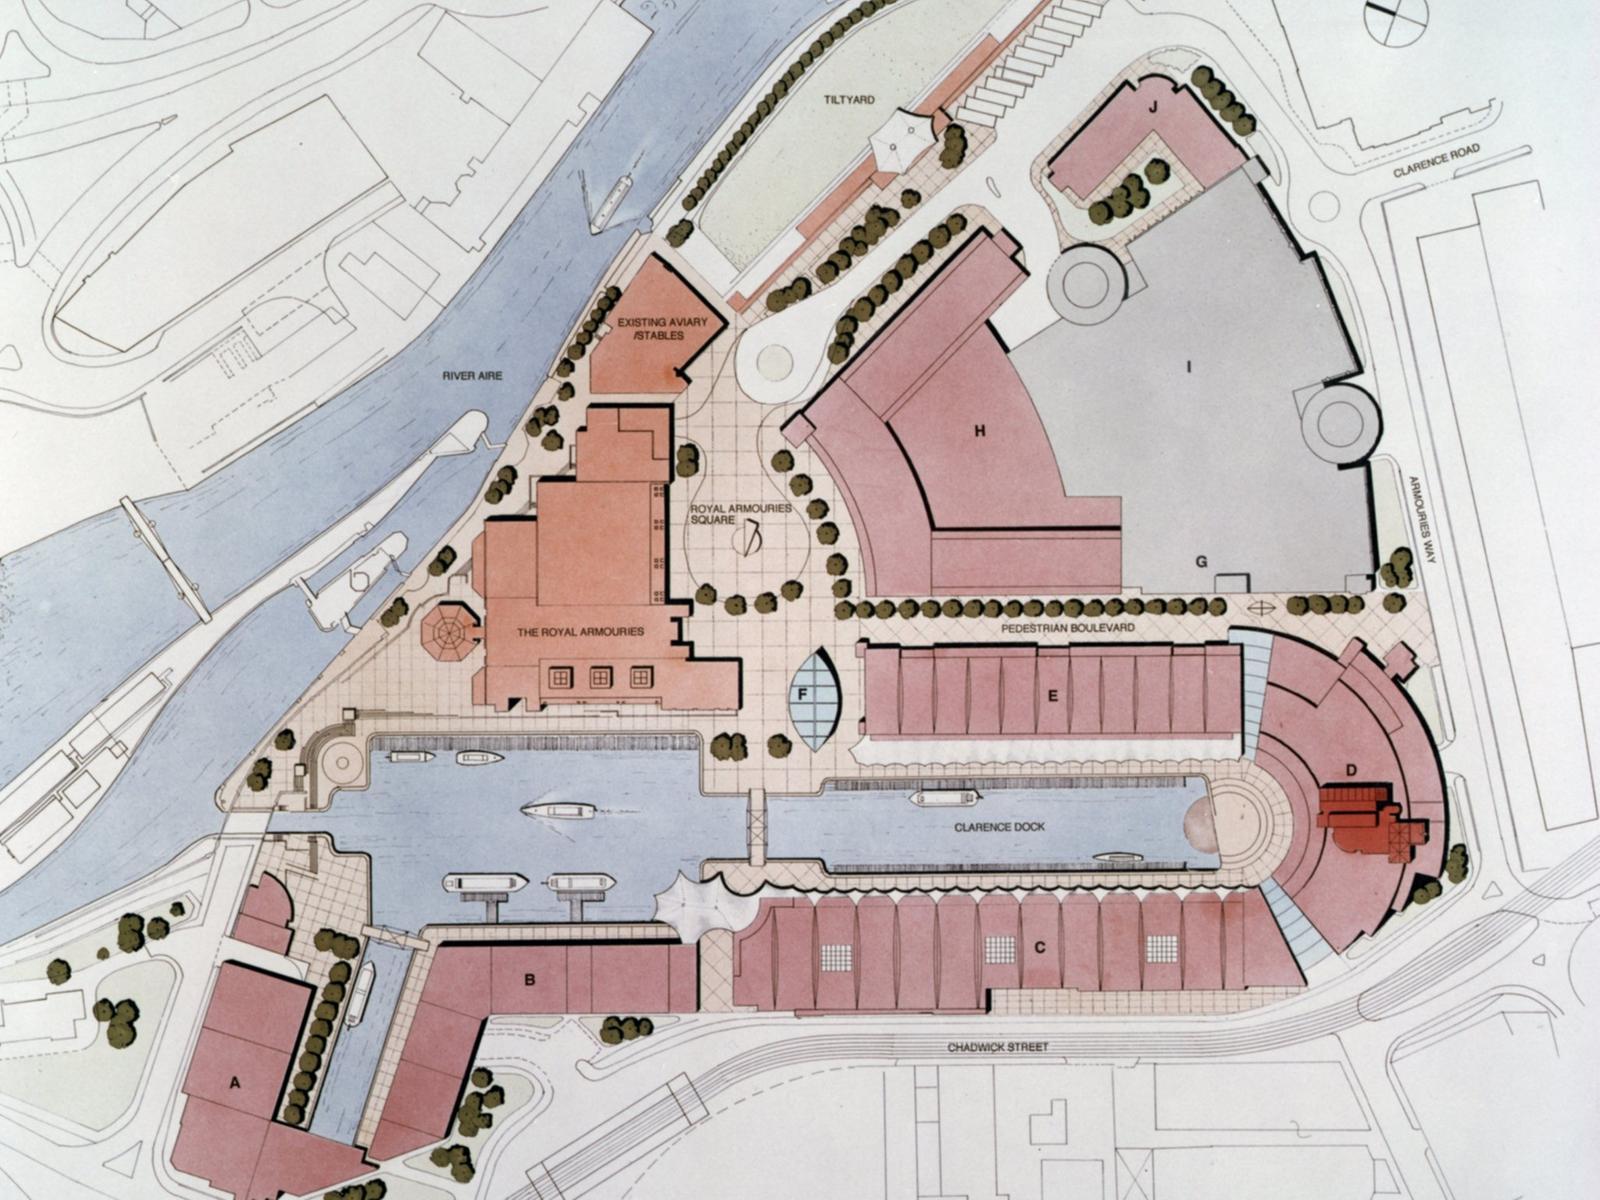 Roof plan of Clarence Dock, the proposed multi-million pound waterside development for Leeds. The 14 acre site was to comprise of a combination of leisure, residential, commercial and retail units.